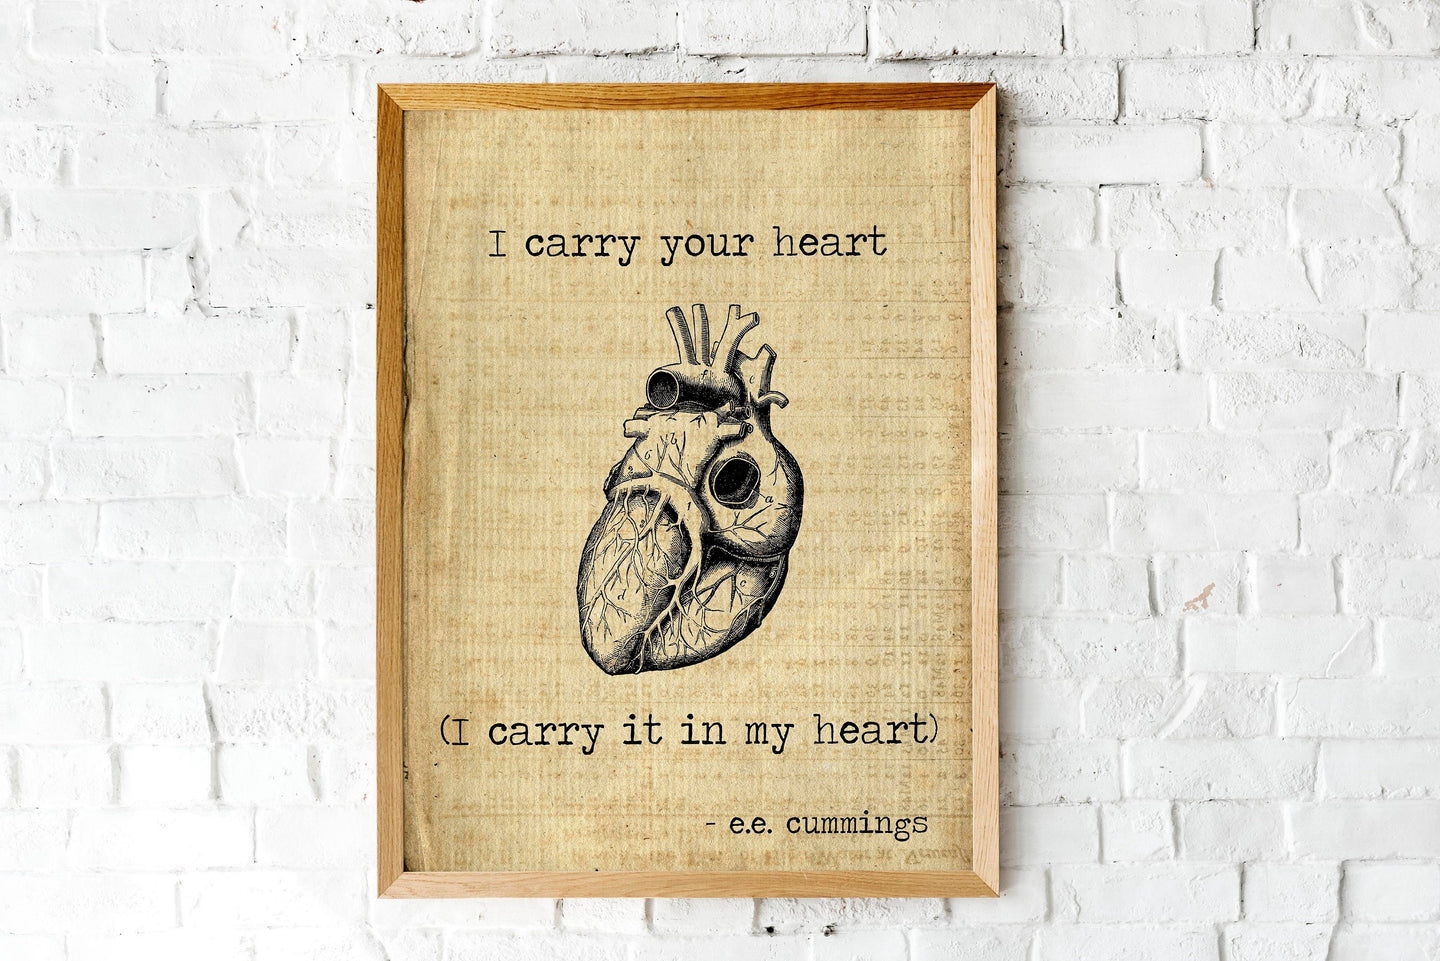 E.E. Cummings Poem I carry your heart (I carry it in my heart) Anatomical heart Art Print Home Decor poetry wall art vintage paper UNFRAMED